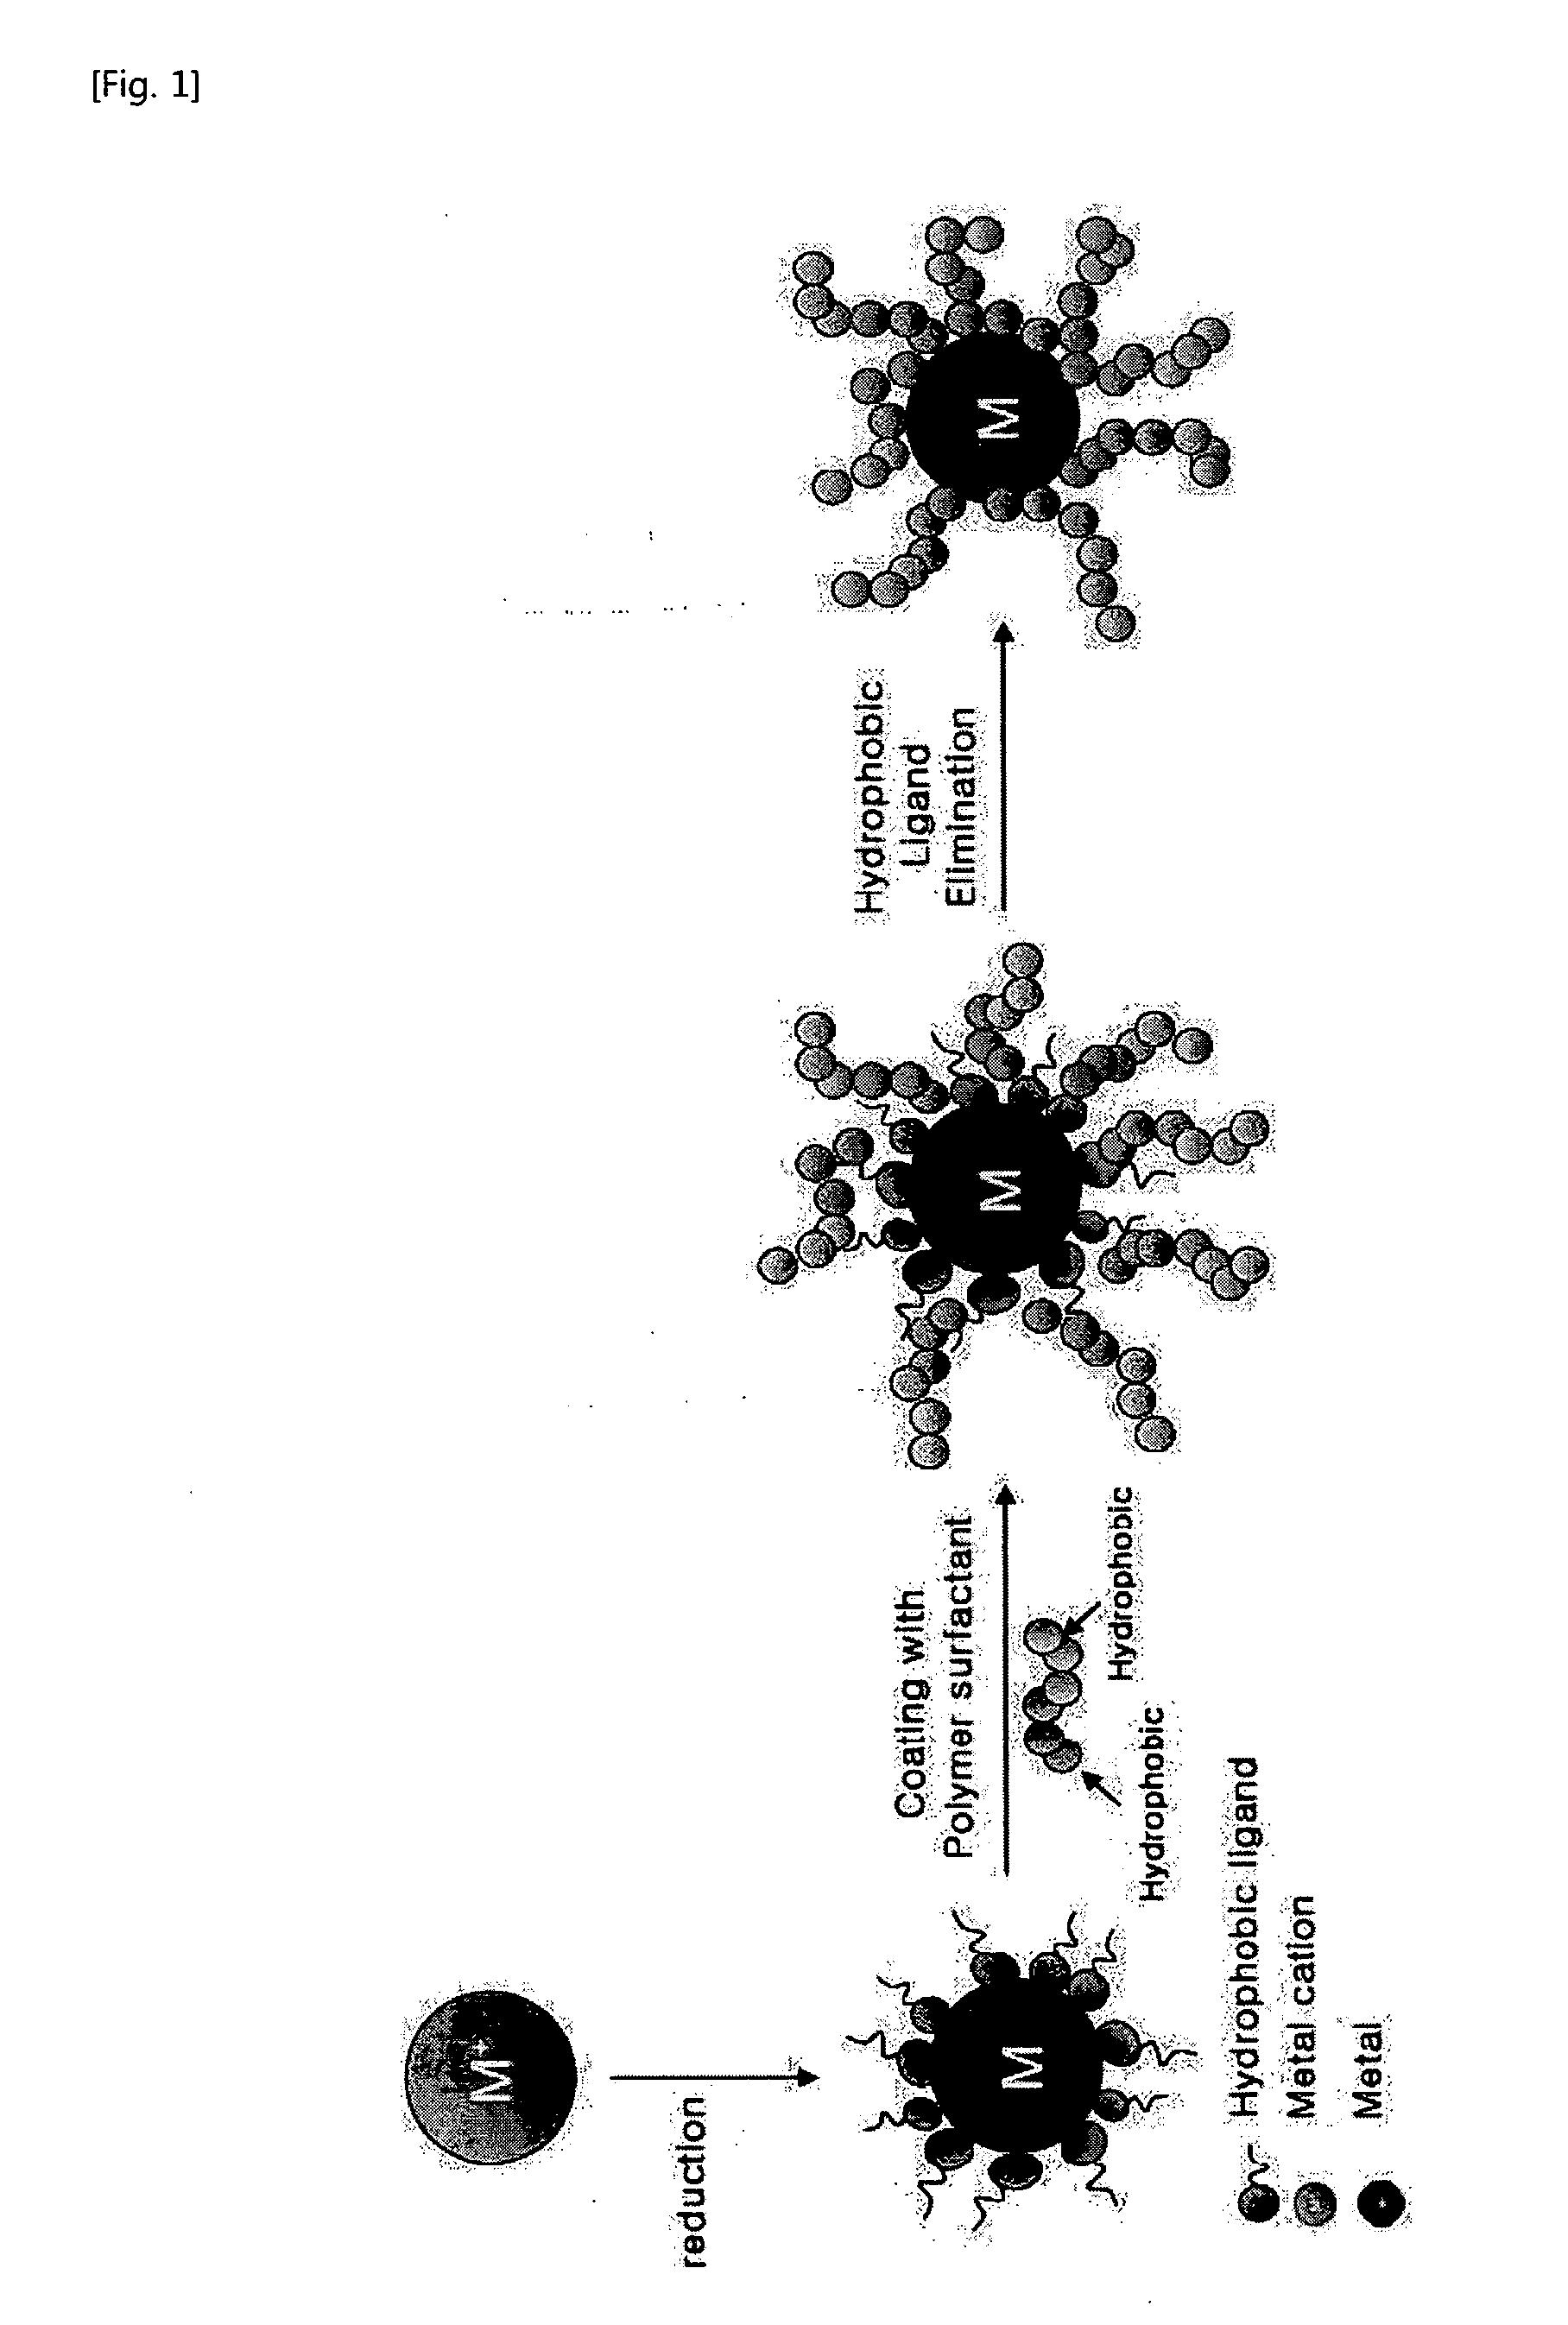 Method for Preparing Water-Soluble Nanoparticles and Their Dispersions